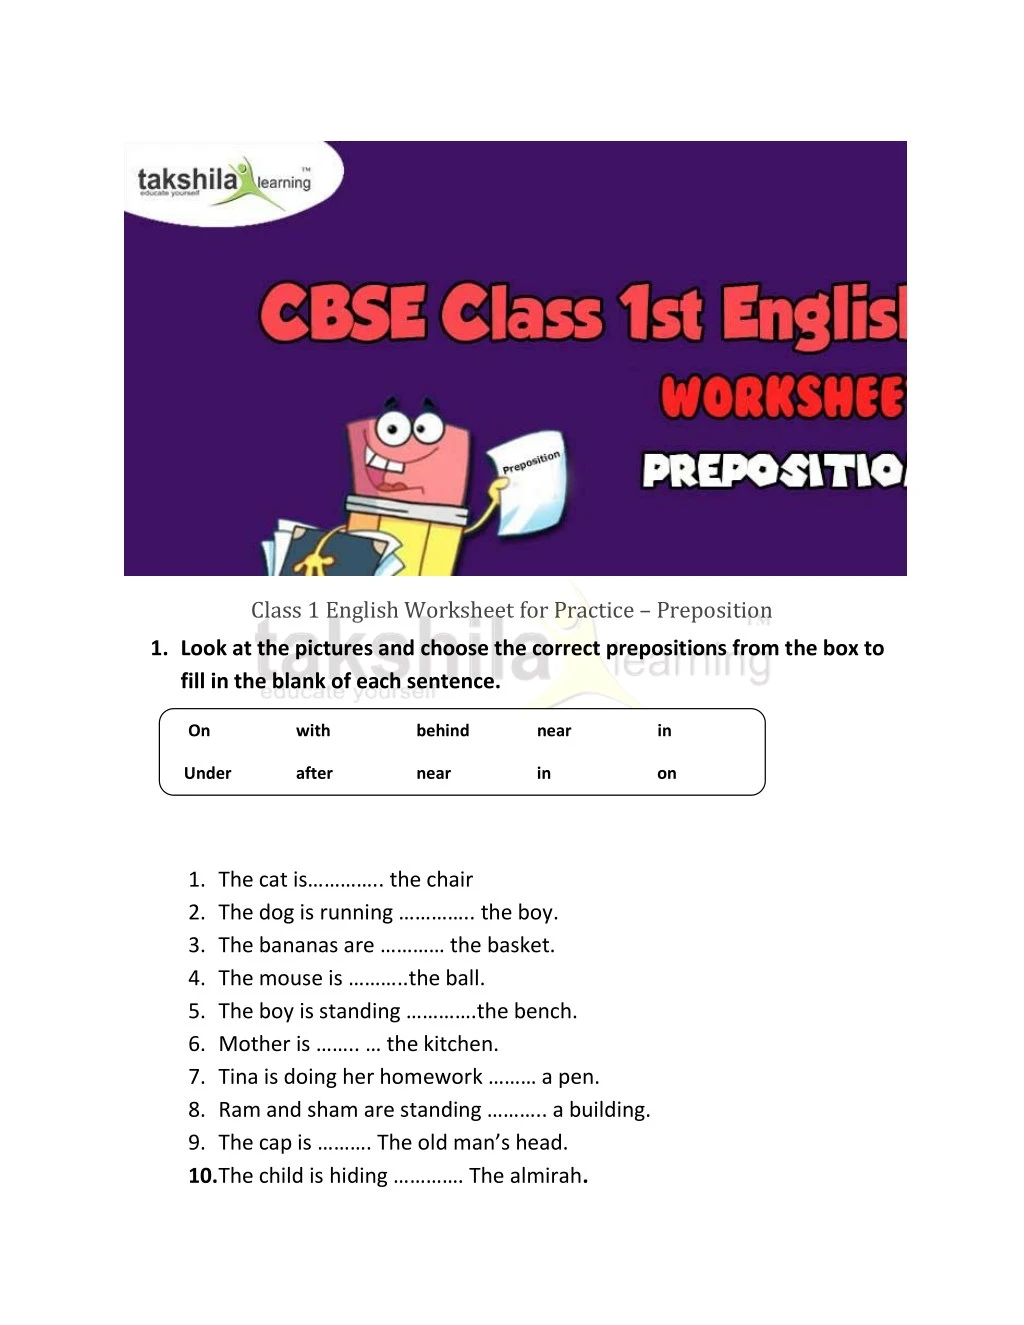 PPT - Class 1 English Worksheet for Practice - Preposition